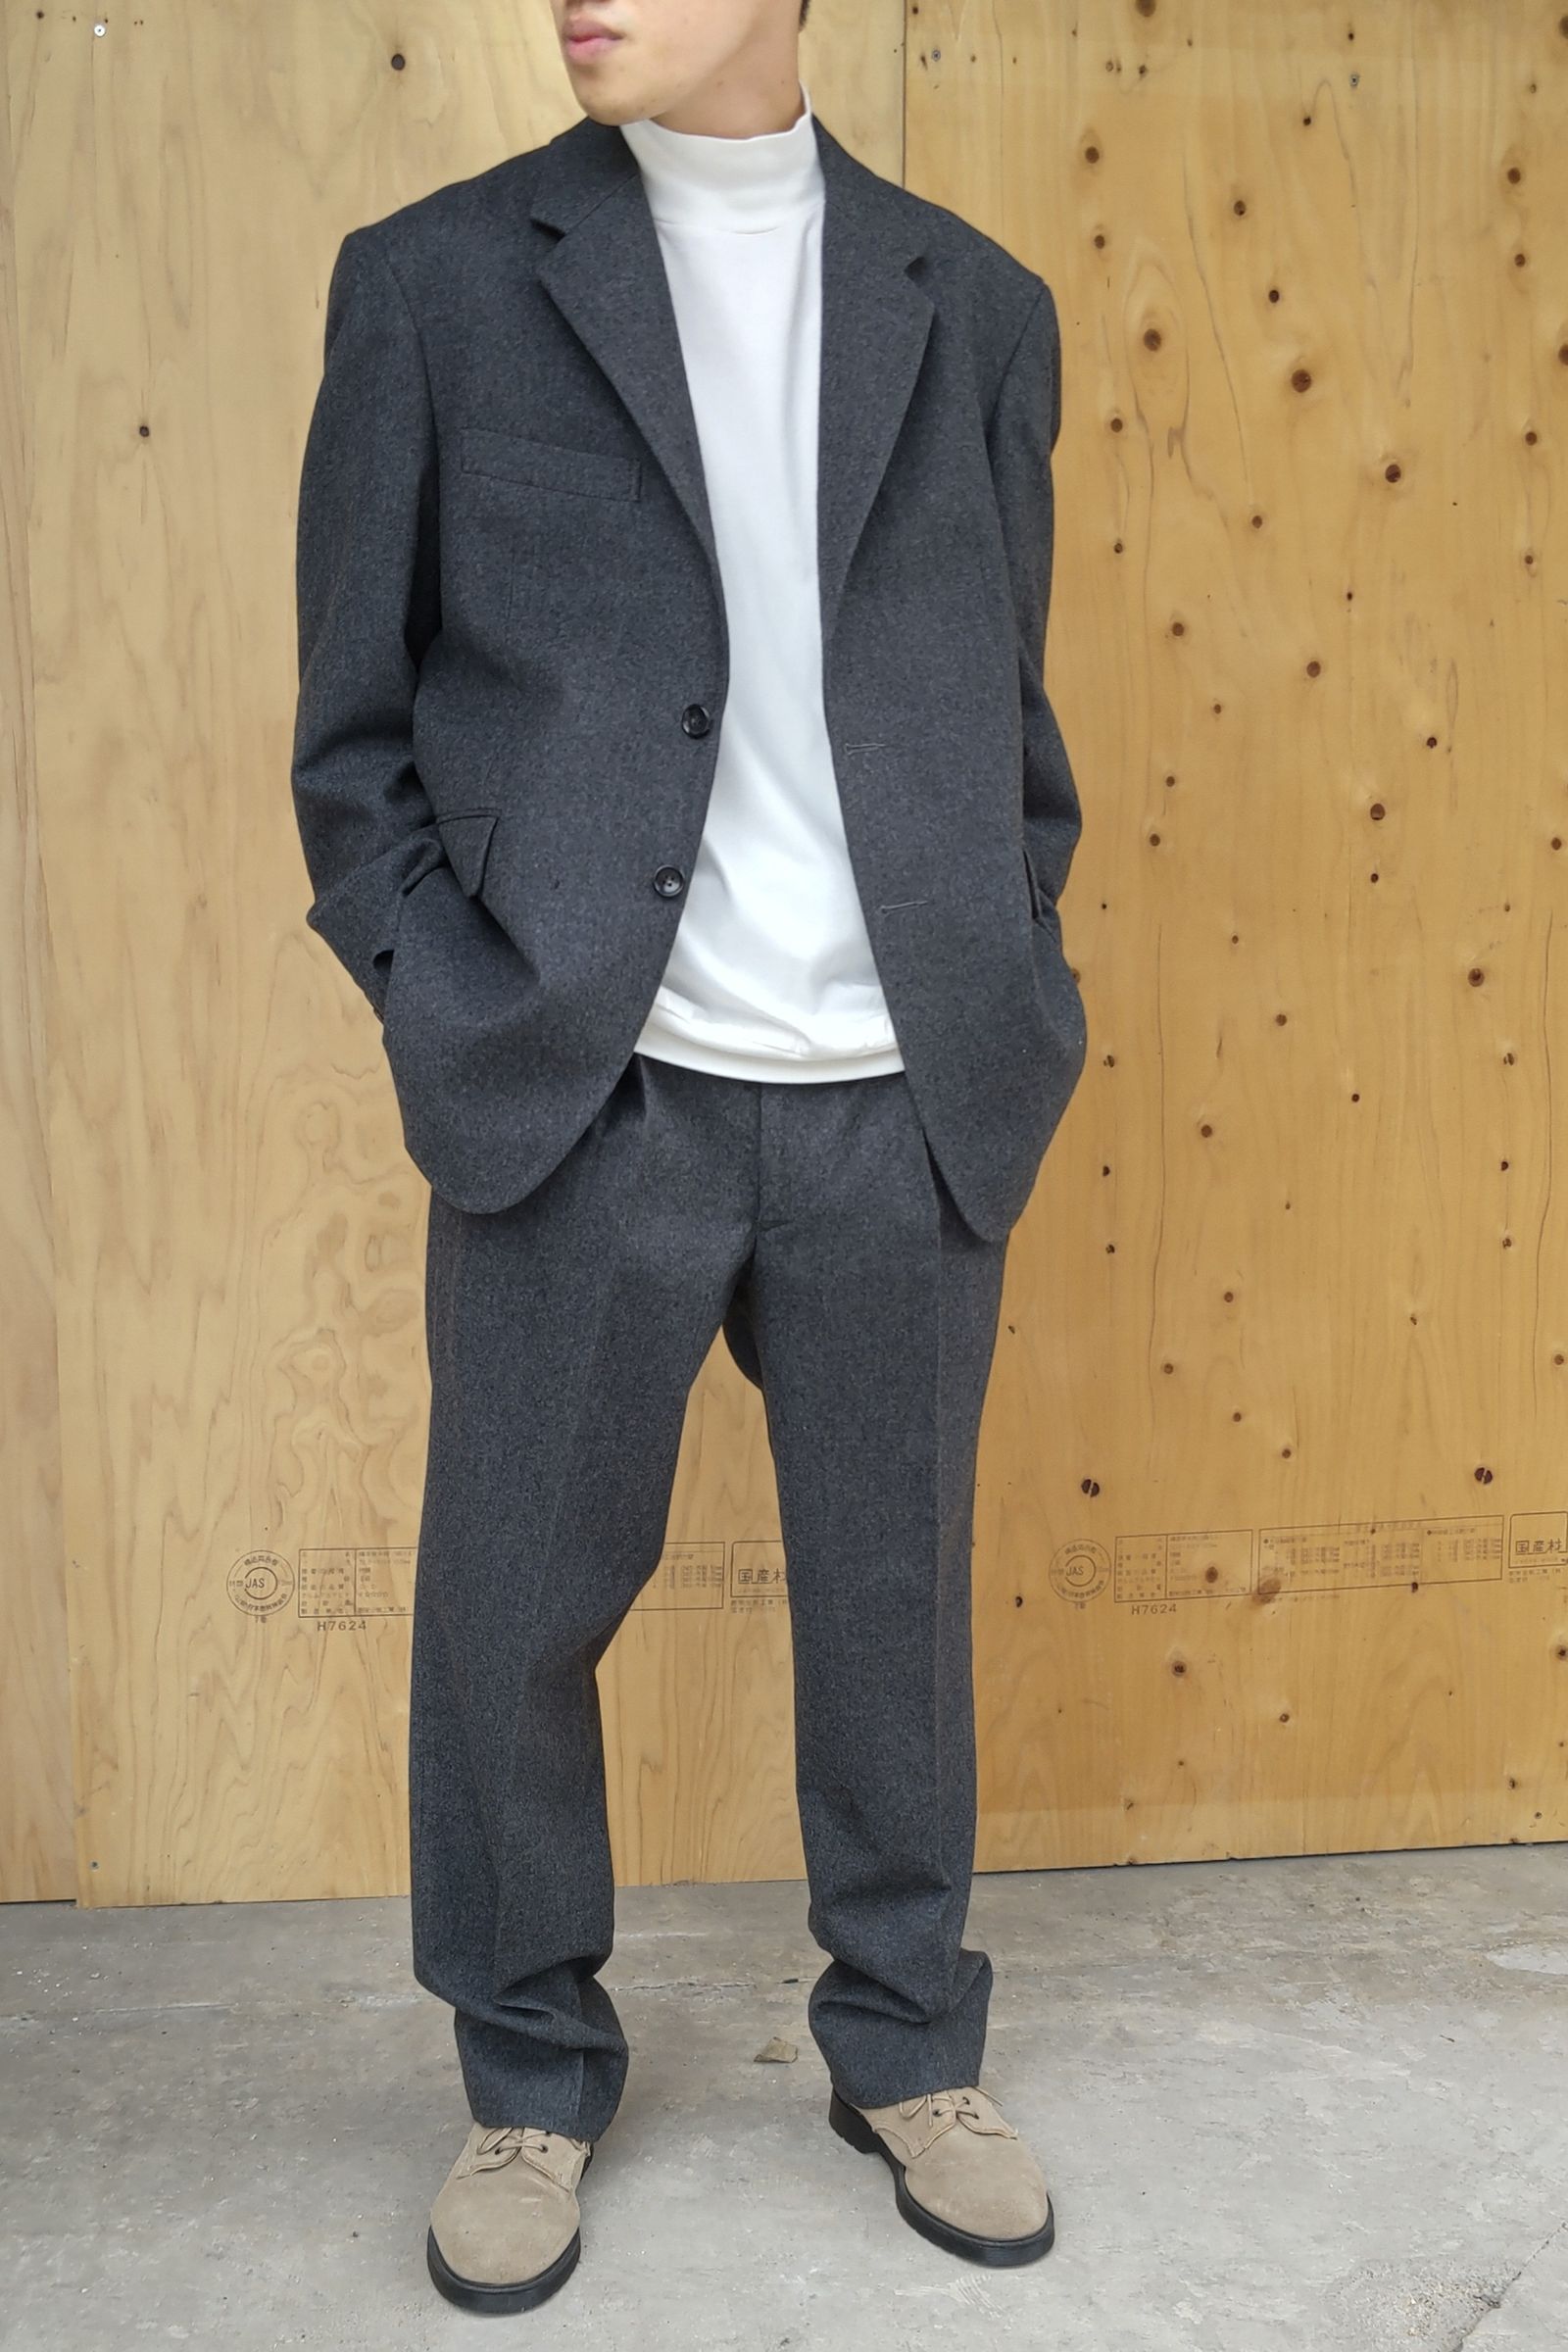 WEWILL - tailored square jacket -gray- 22aw | asterisk